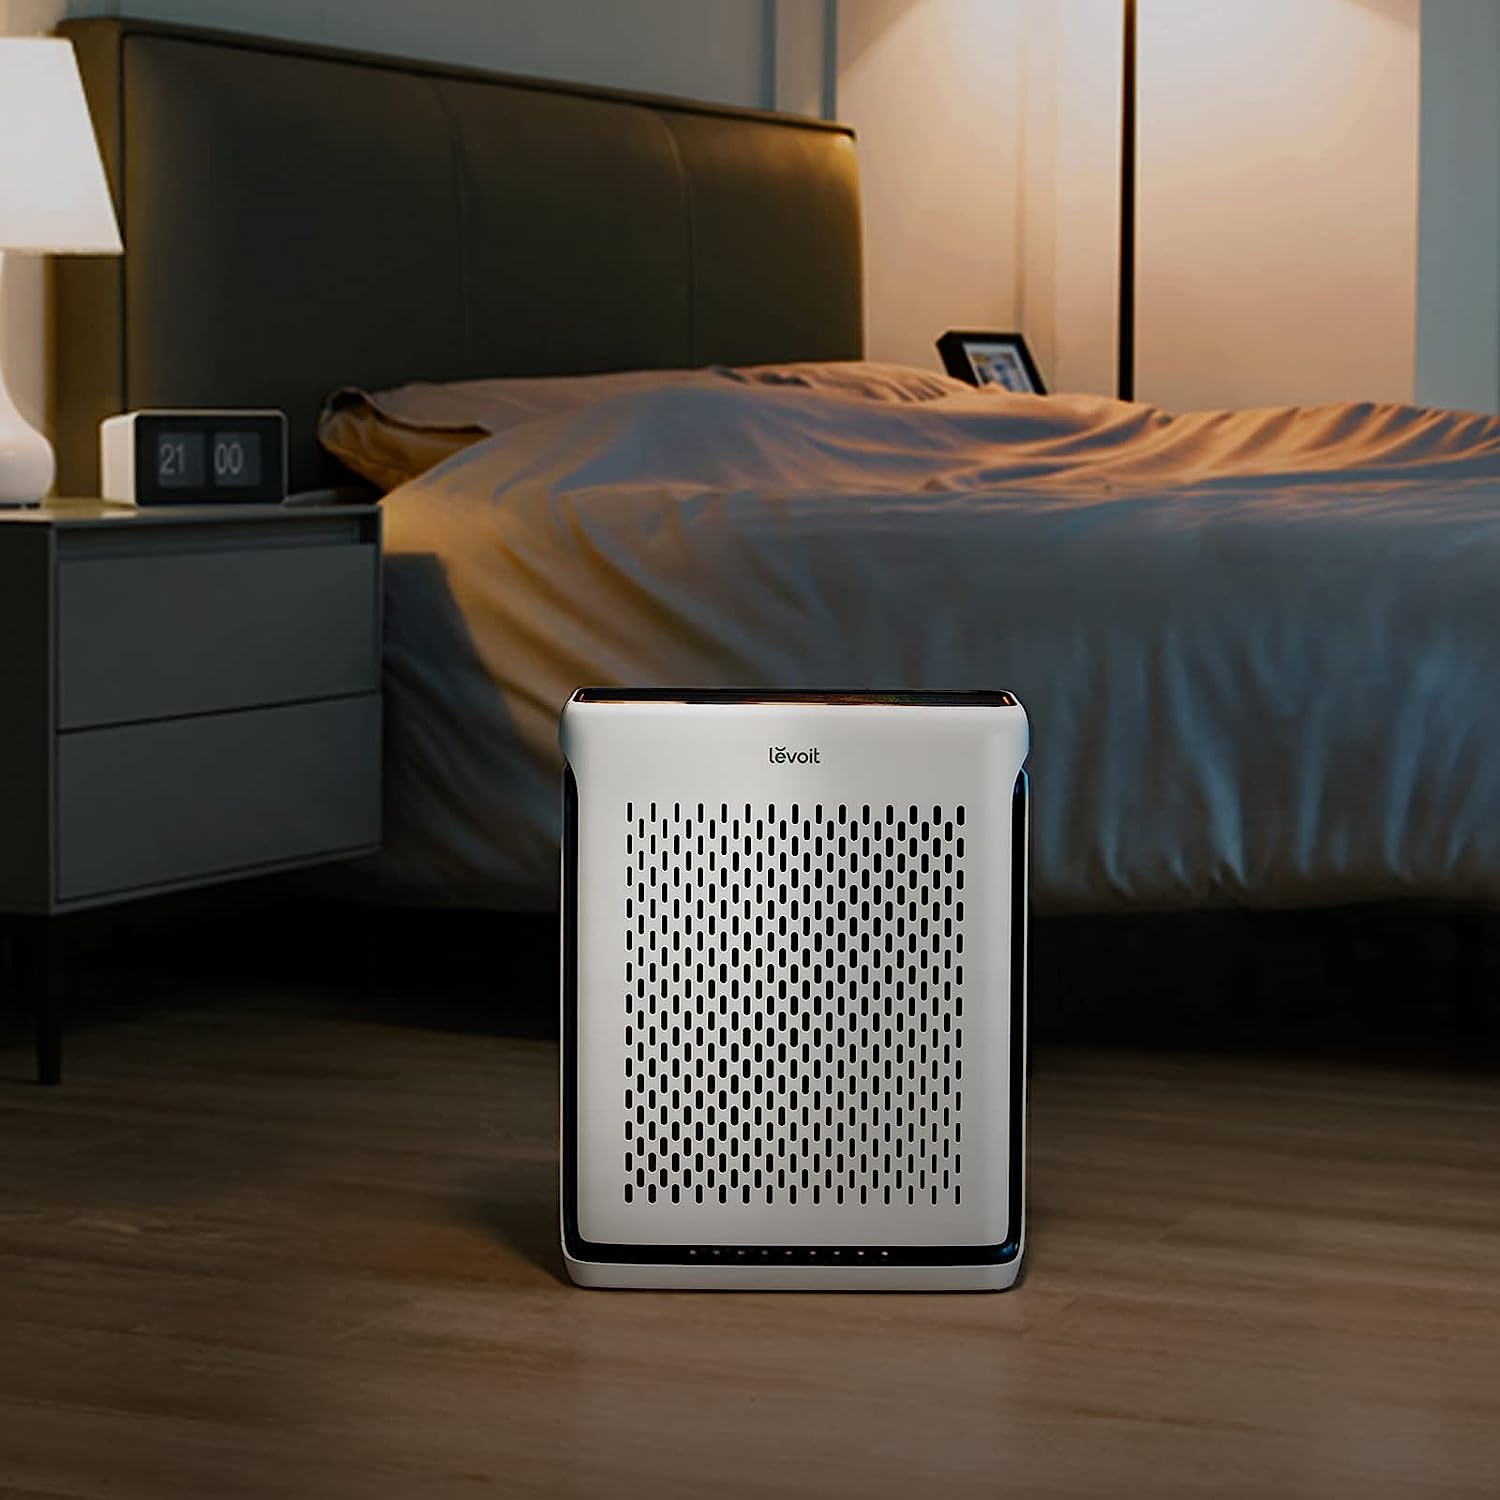 How To Reset Red Light On Levoit Air Purifier